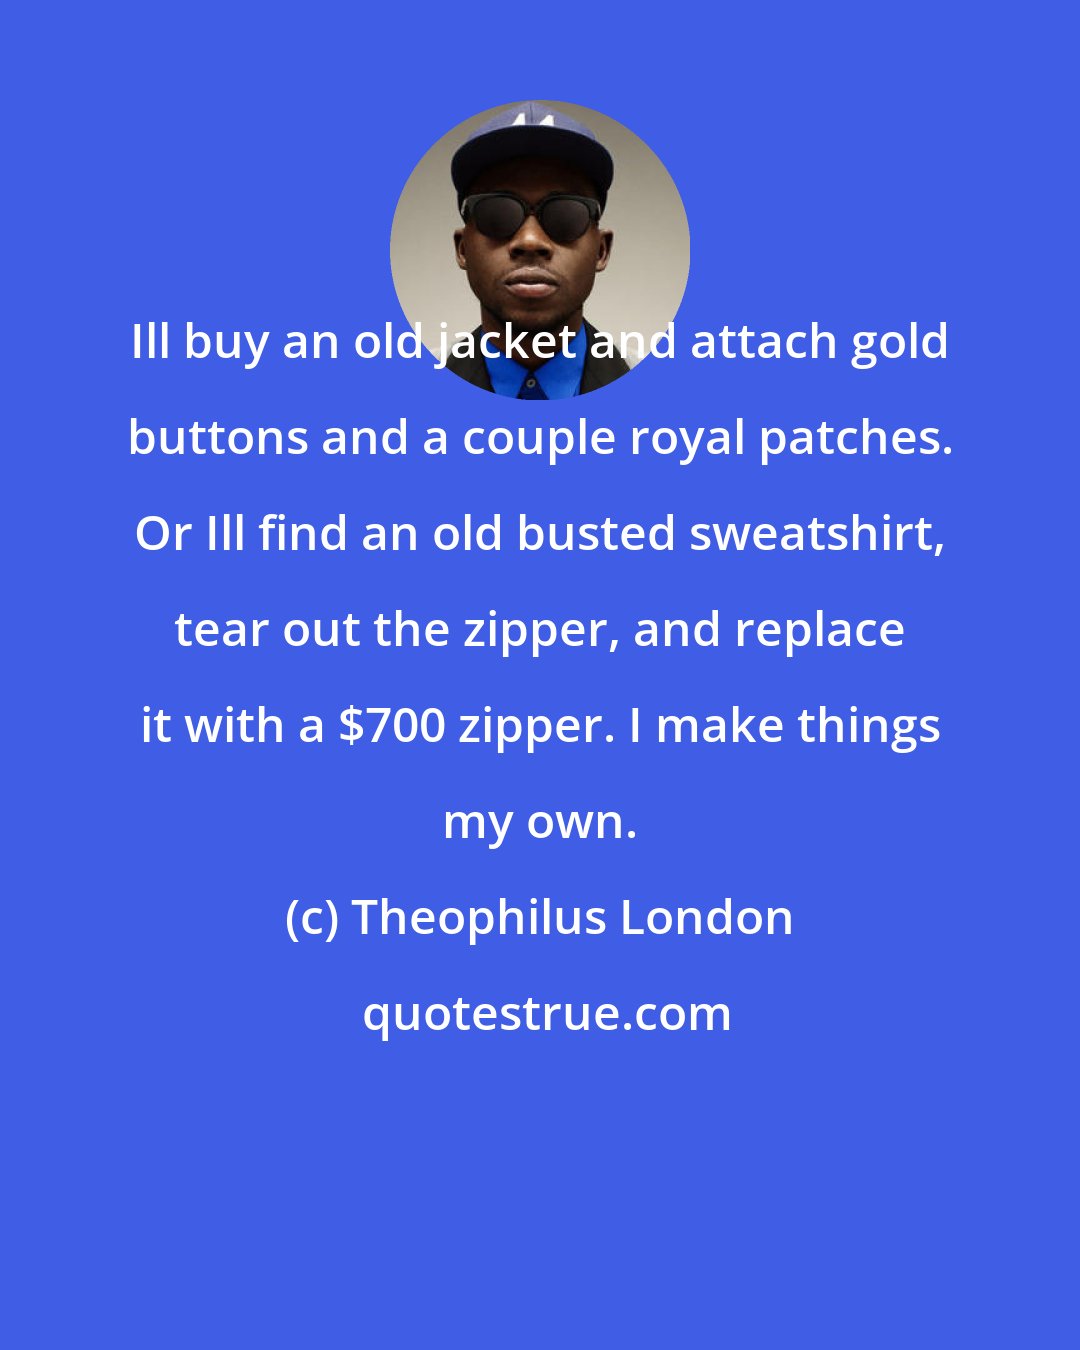 Theophilus London: Ill buy an old jacket and attach gold buttons and a couple royal patches. Or Ill find an old busted sweatshirt, tear out the zipper, and replace it with a $700 zipper. I make things my own.